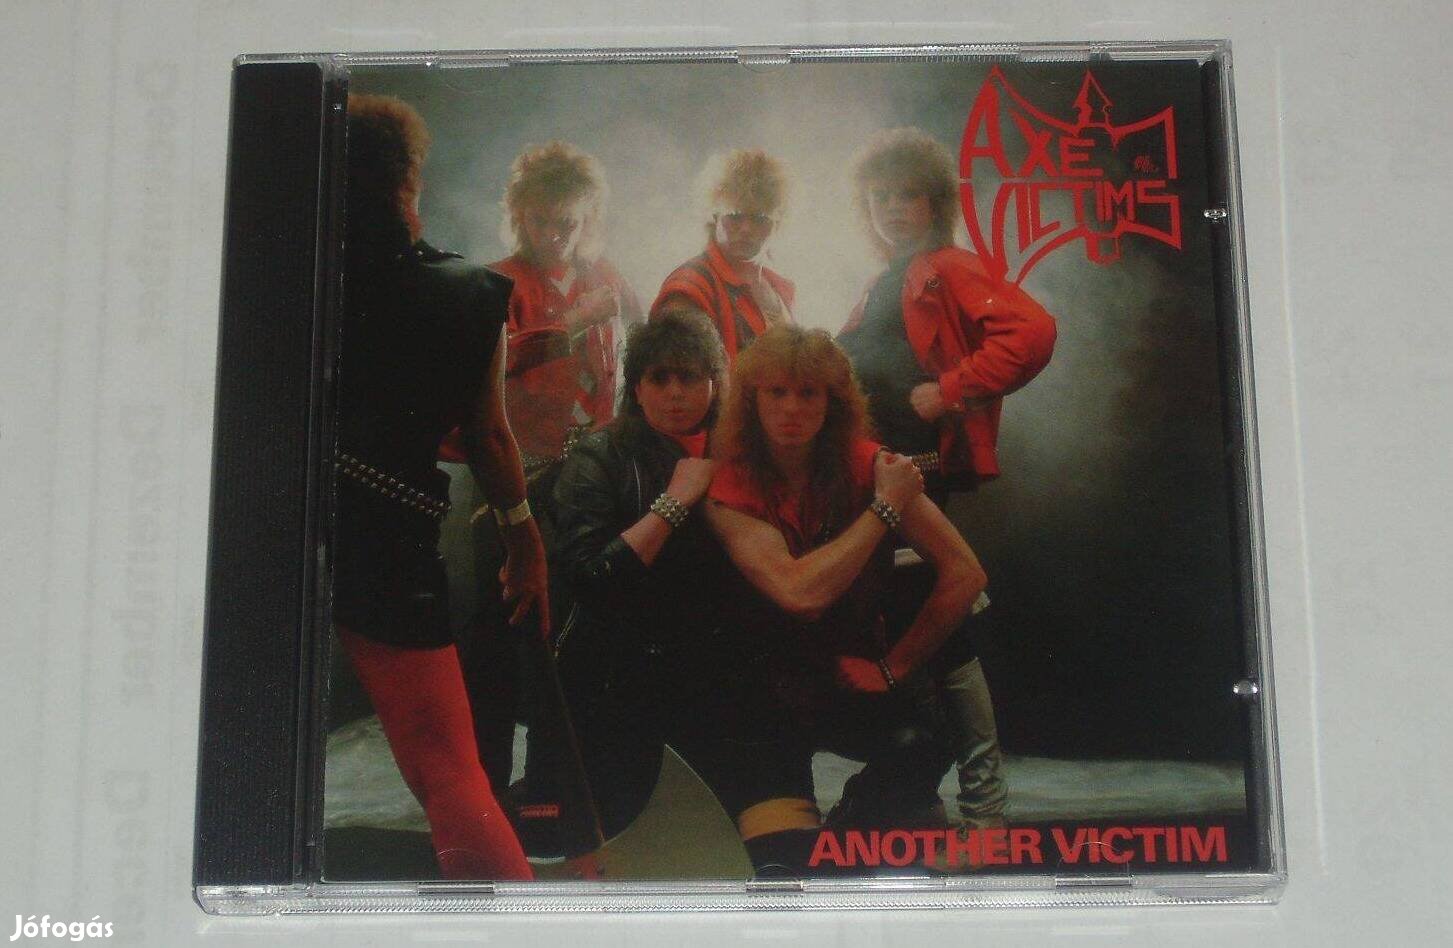 Axe Victims - Another Victim CD Heavy Metal Mausoleum